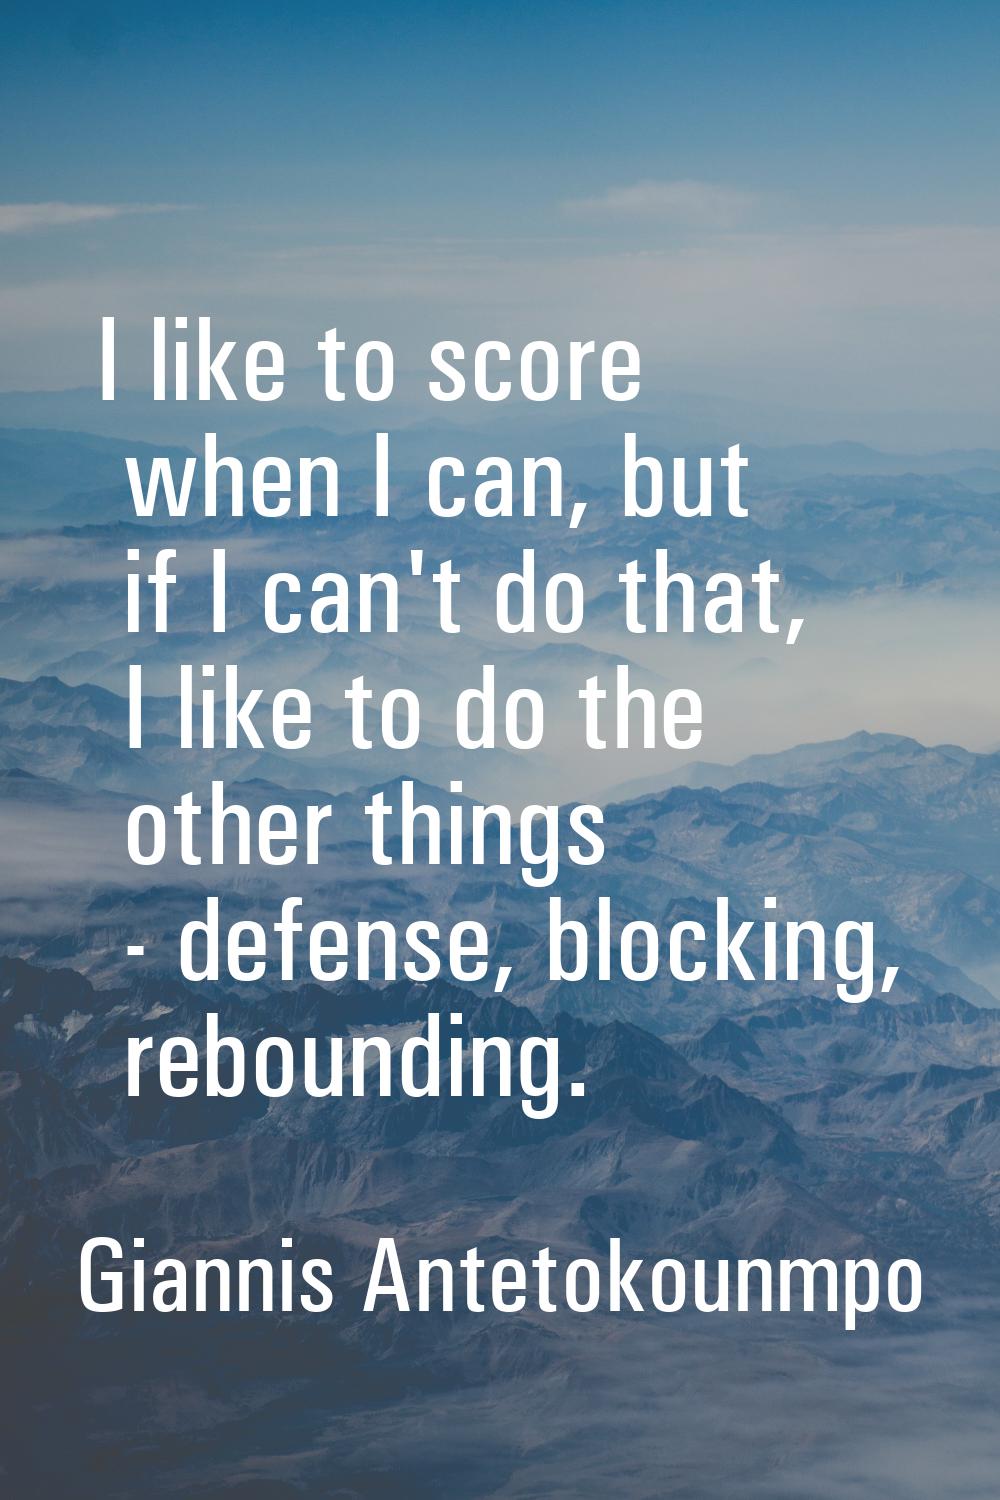 I like to score when I can, but if I can't do that, I like to do the other things - defense, blocki